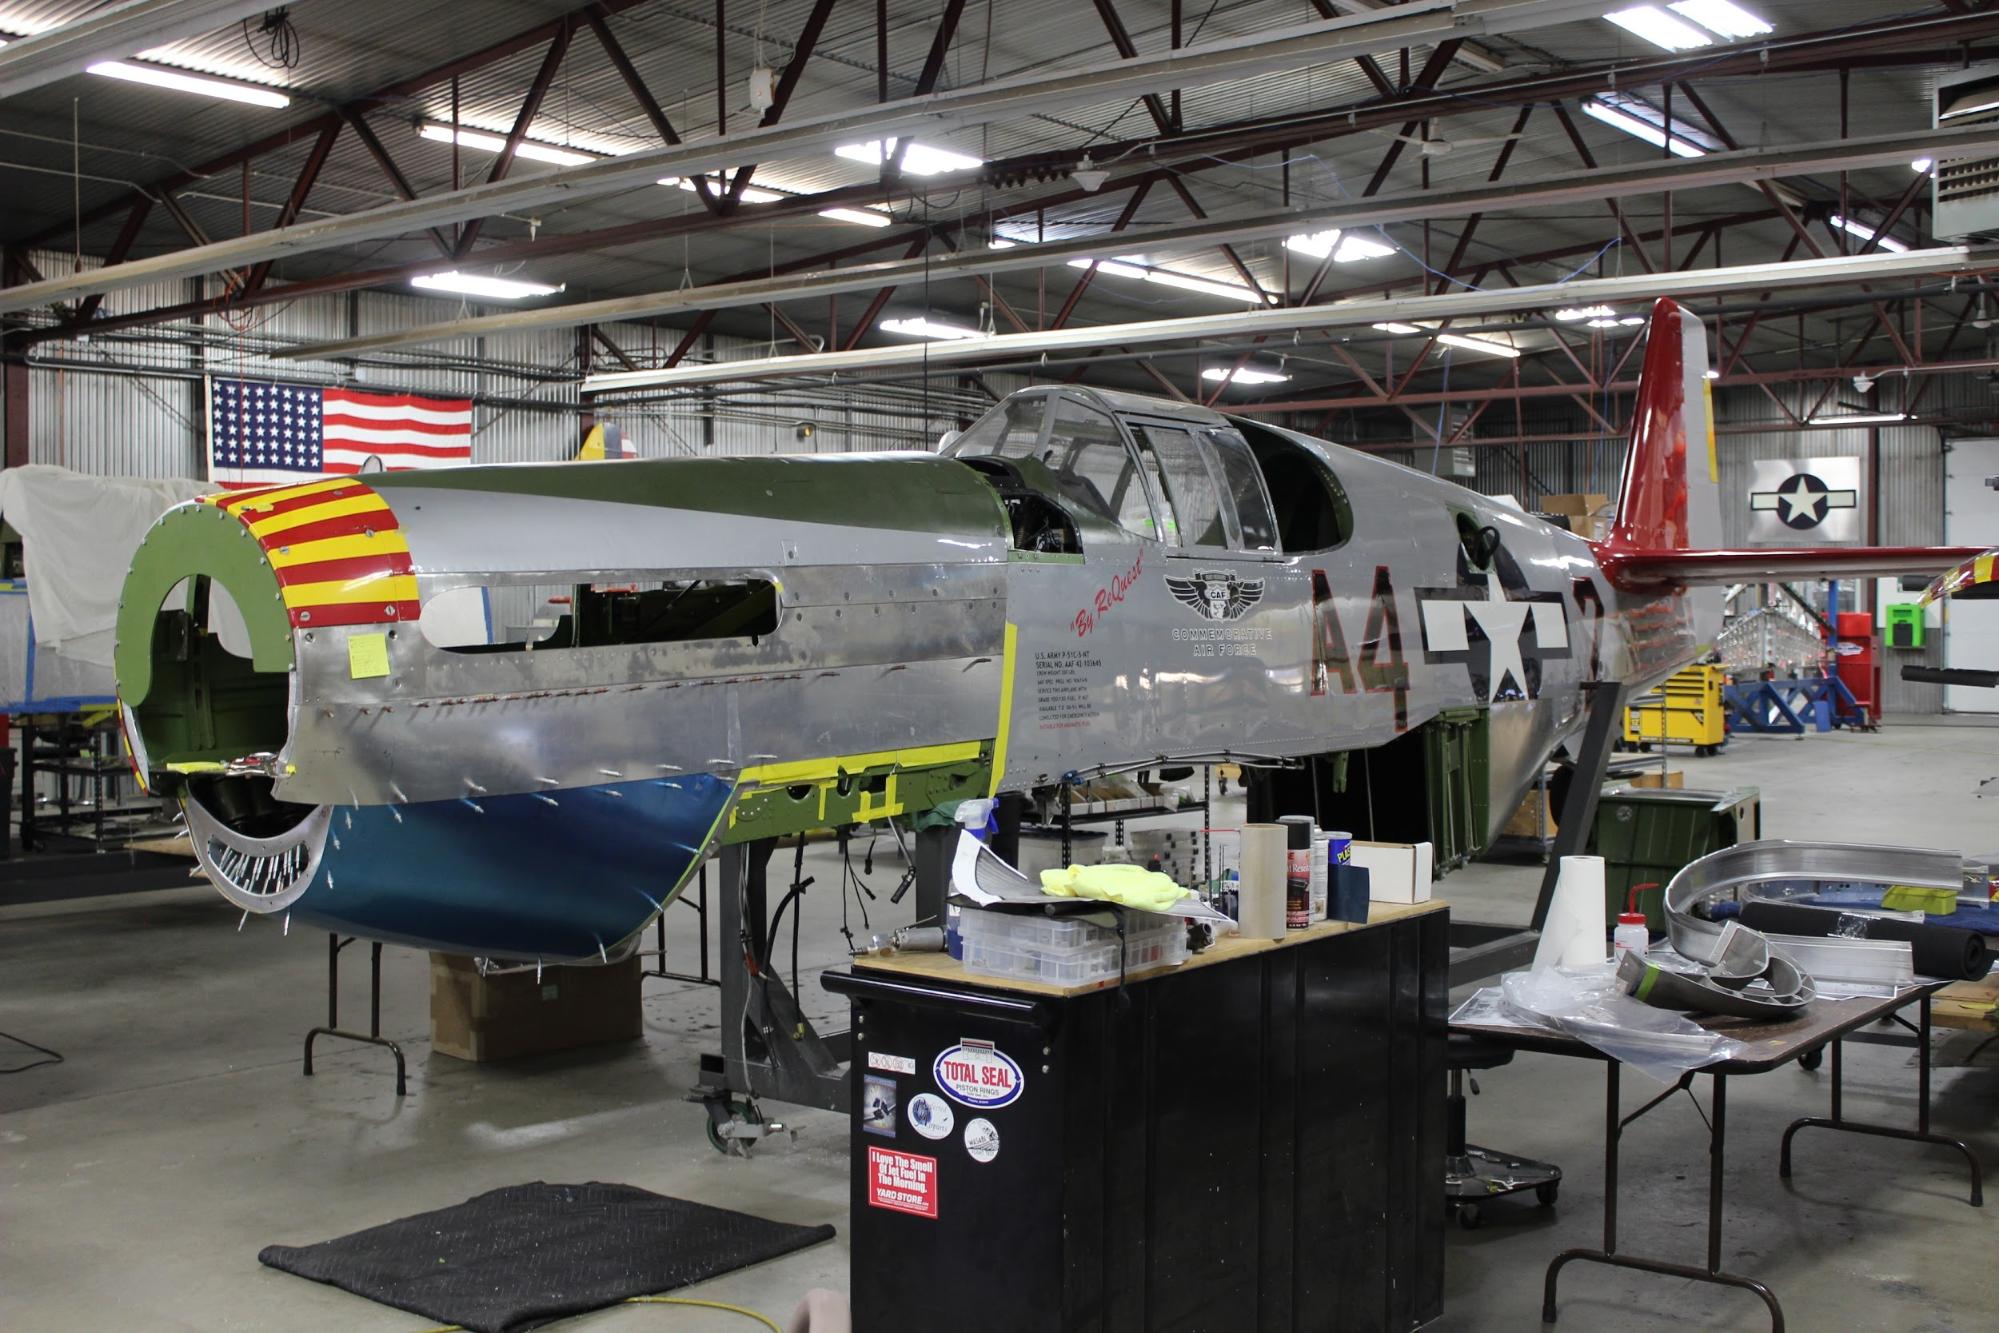 Finally a view of the Red Tail with all the cowl skins that have been completed in place.